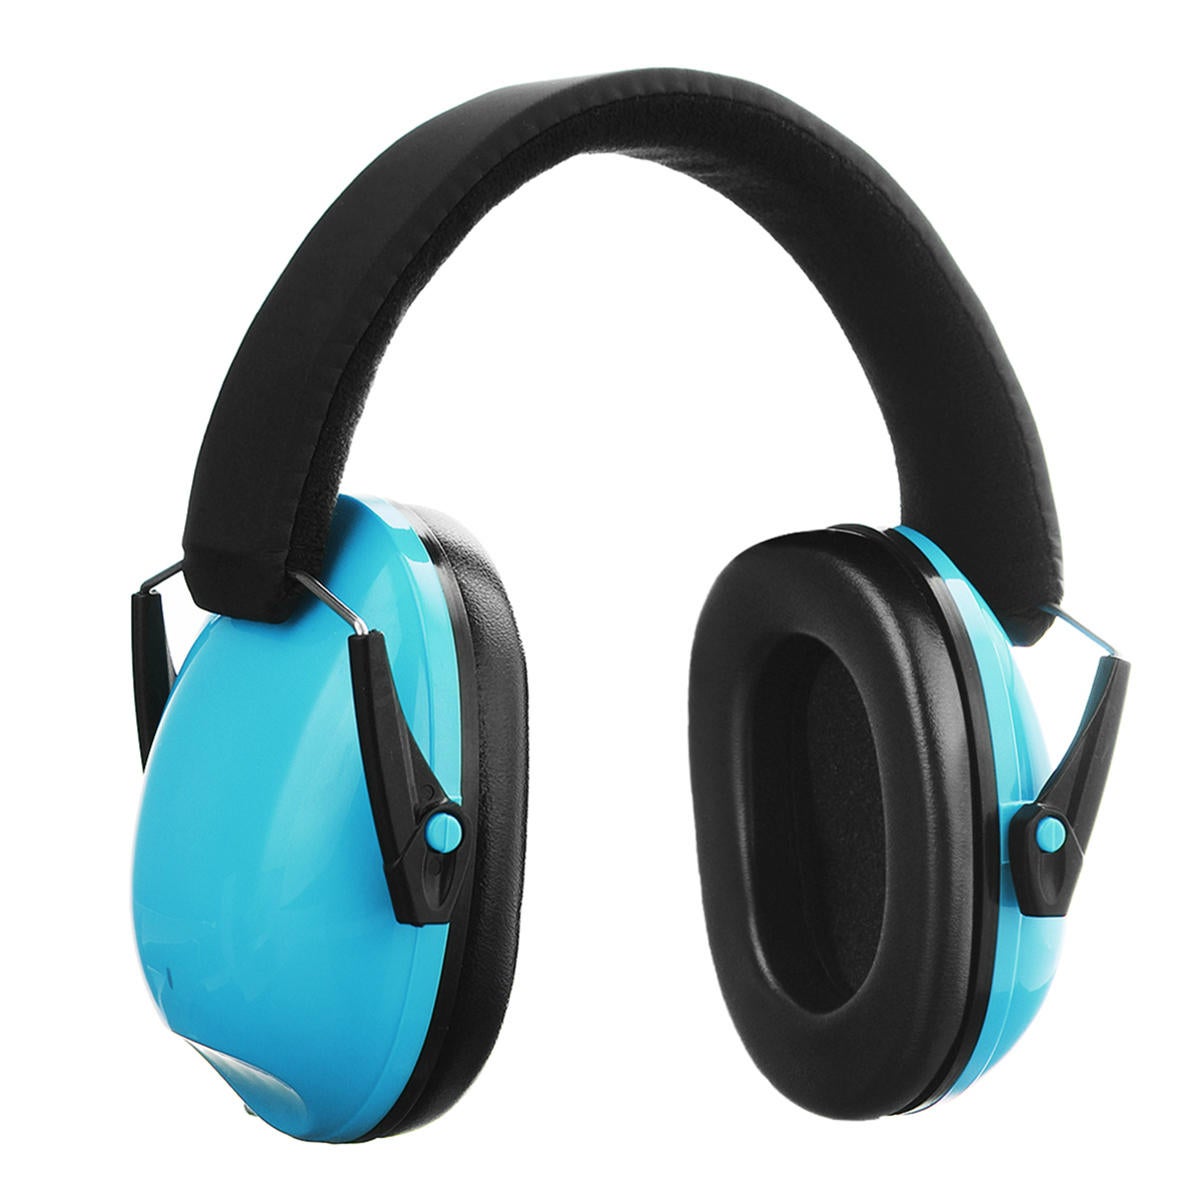 Ear Muffs Hearing Protection Noise Reduction Ear Defenders Safety Earphone